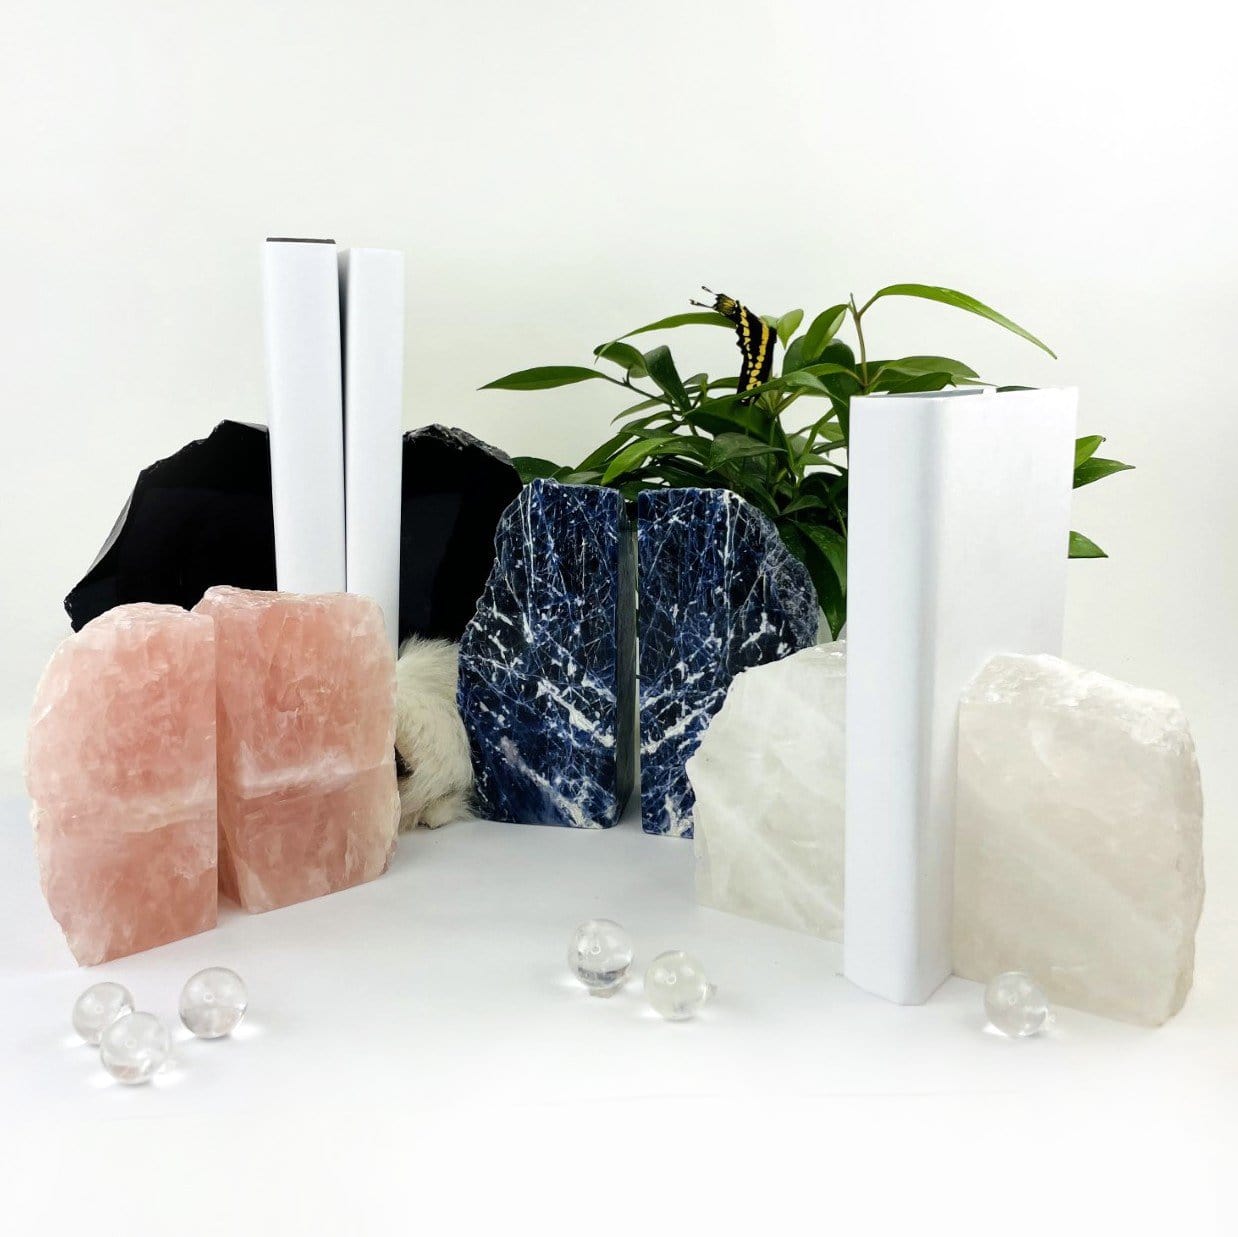 Bookends displayed to show they come in rose quartz sodalite and white quartz black obsidian